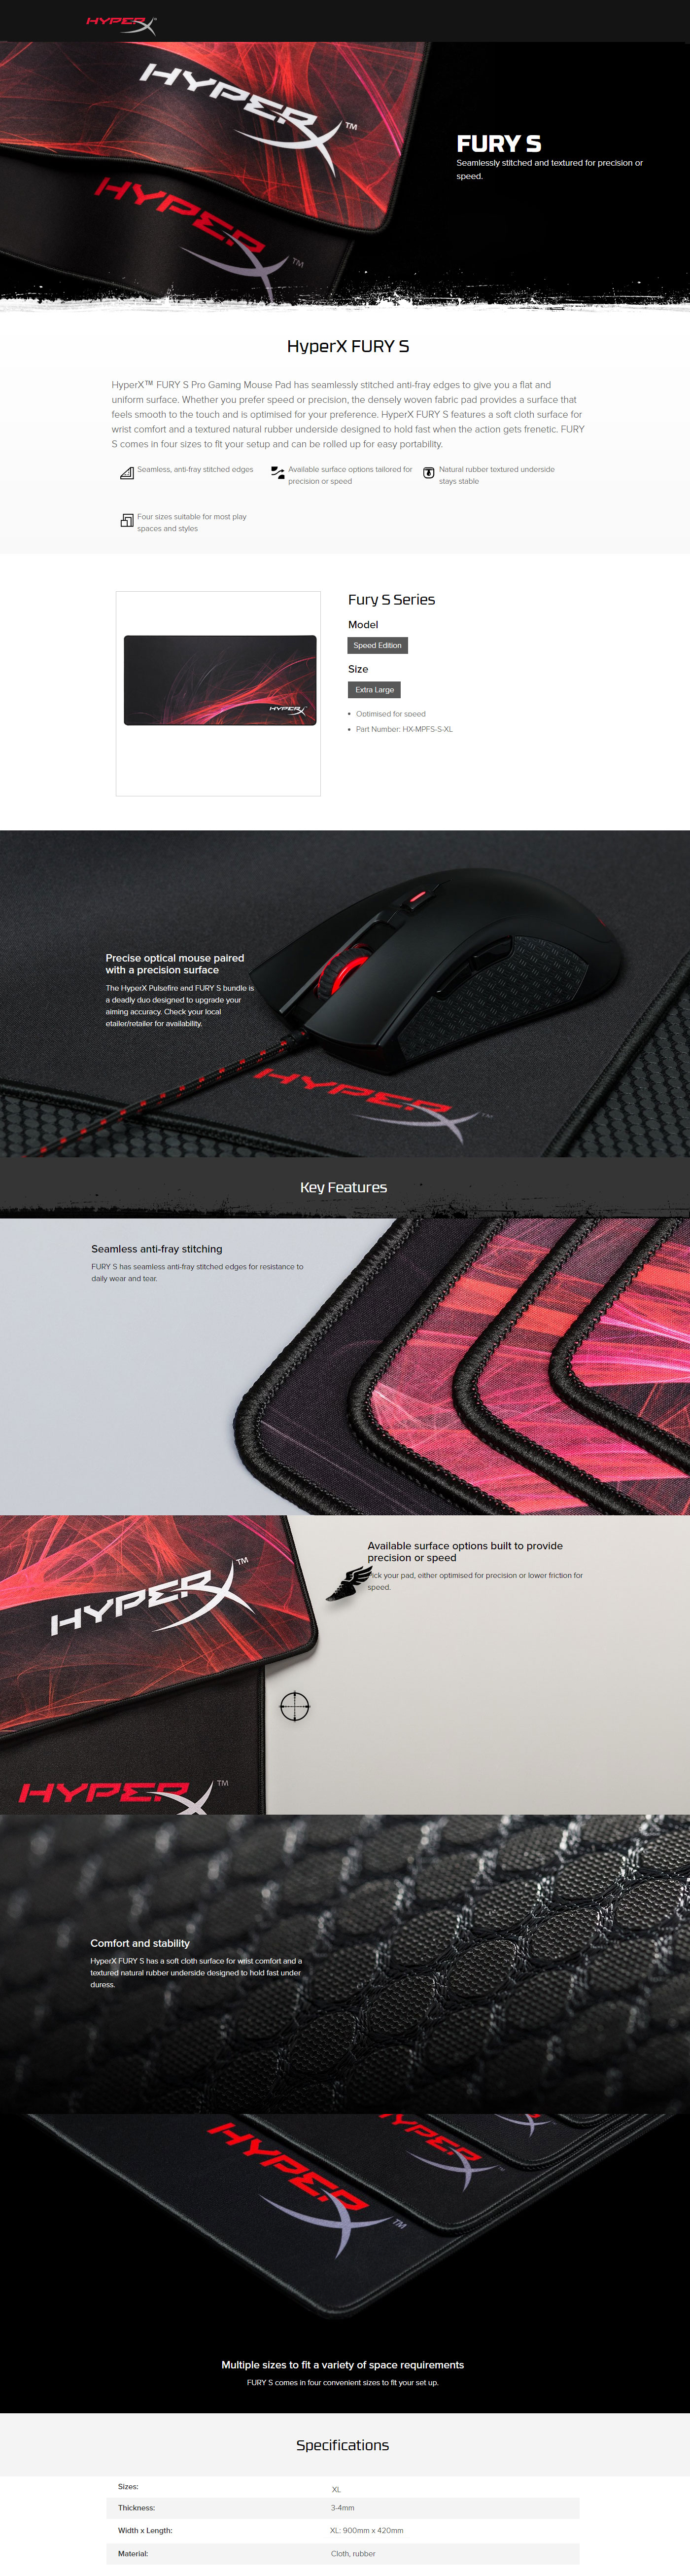  Buy Online HyperX FURY S Speed Edition Gaming Mouse Pad - Extra Large (HX-MPFS-S-XL)